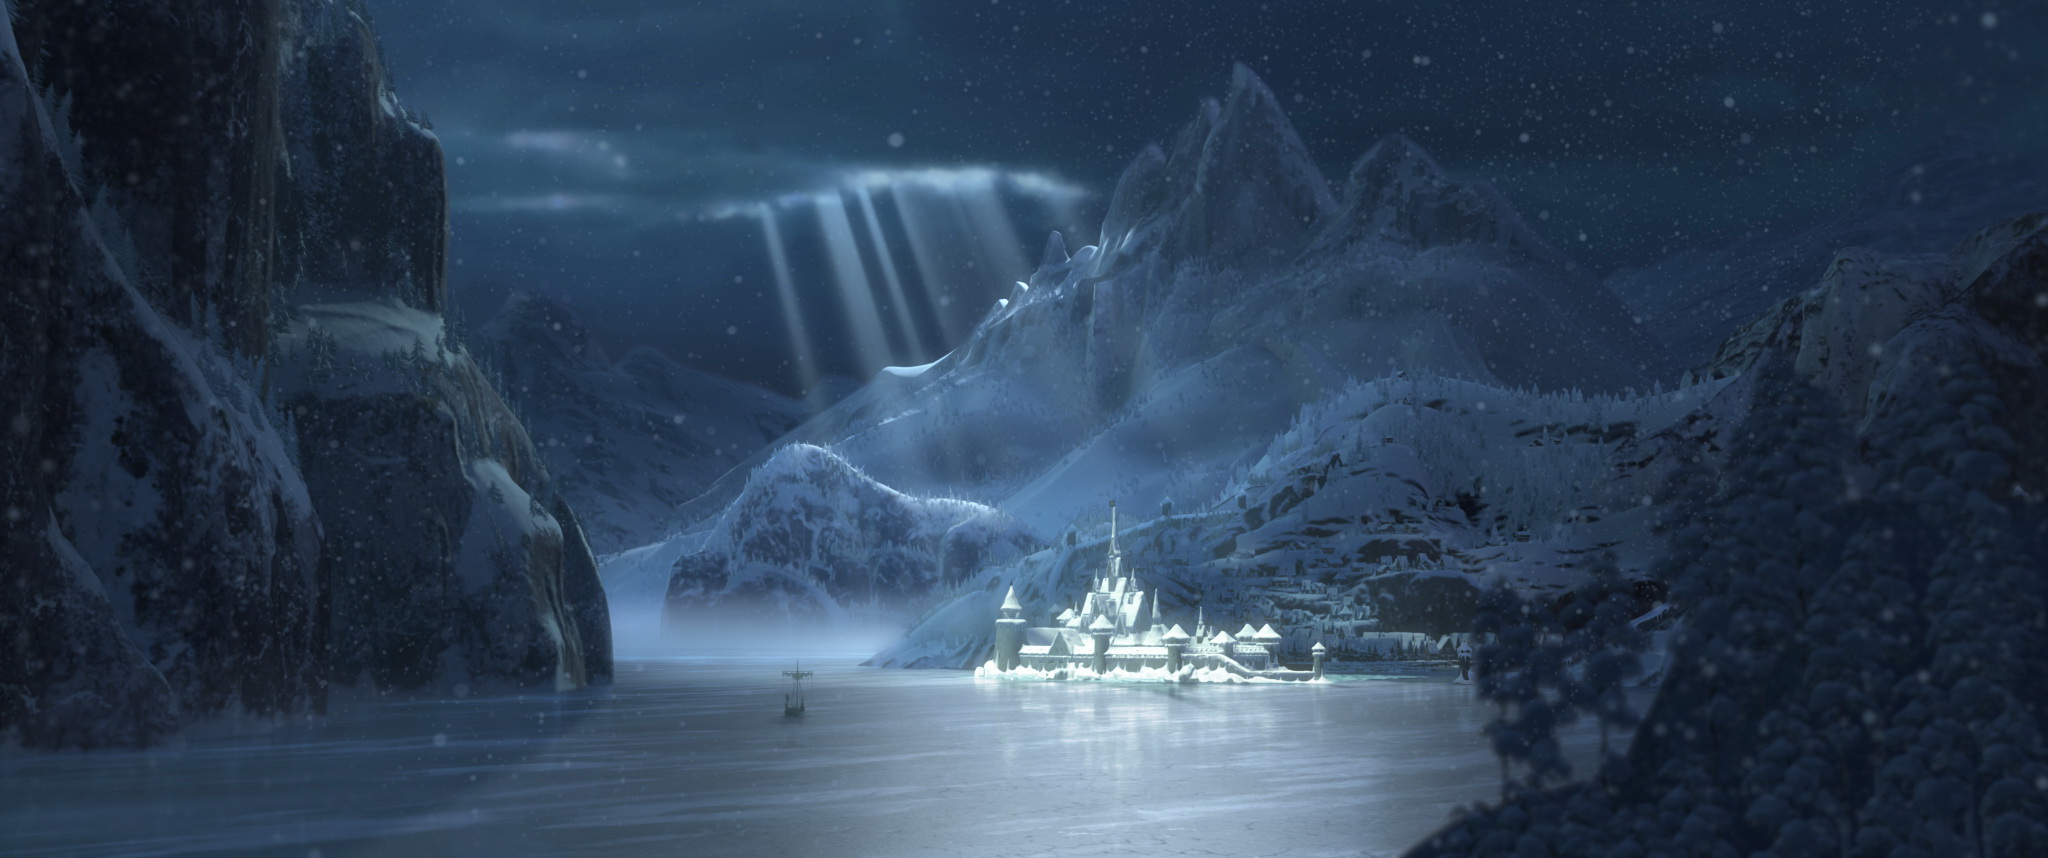 "FROZEN" Arendelle in Winter concept art. ©2013 Disney. All Rights Reserved.